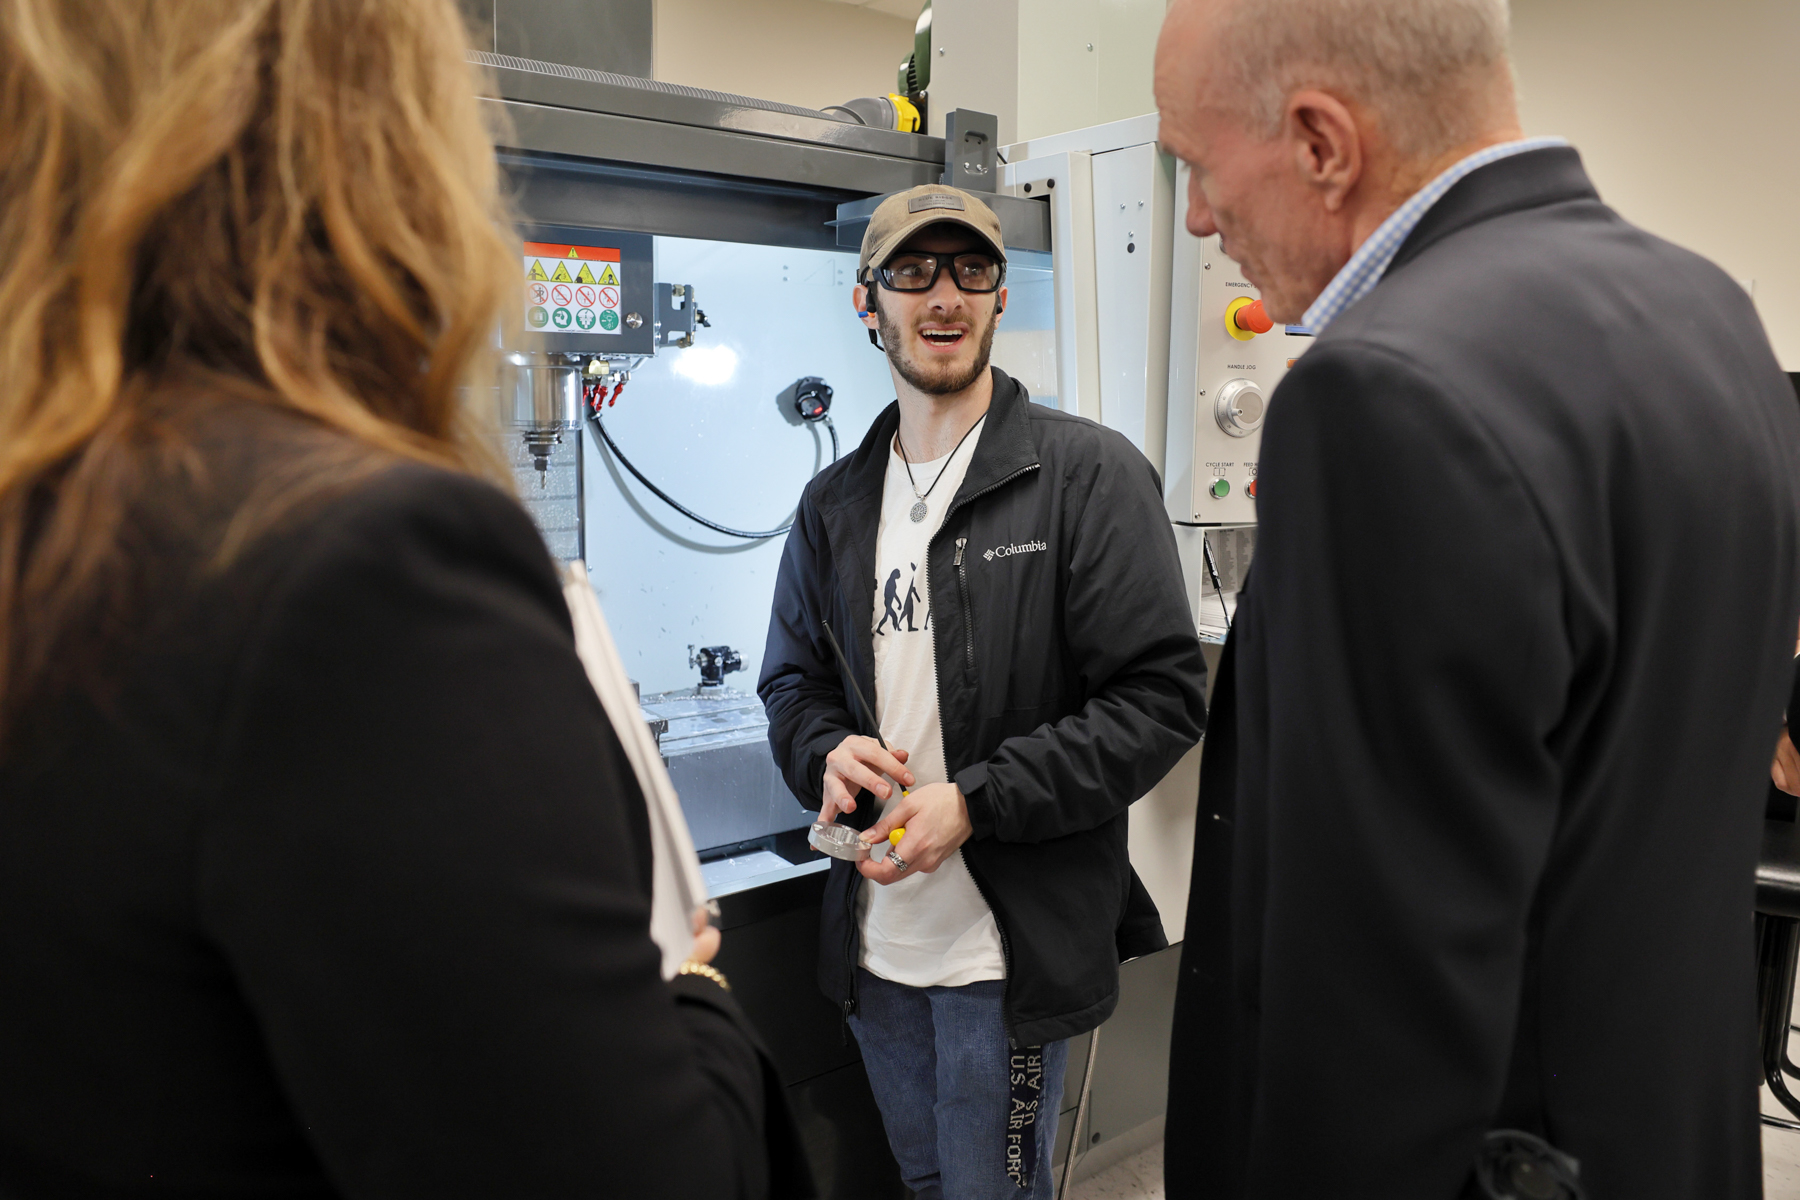 A man wearing safety glasses speaks to a man and a woman in front of a machine